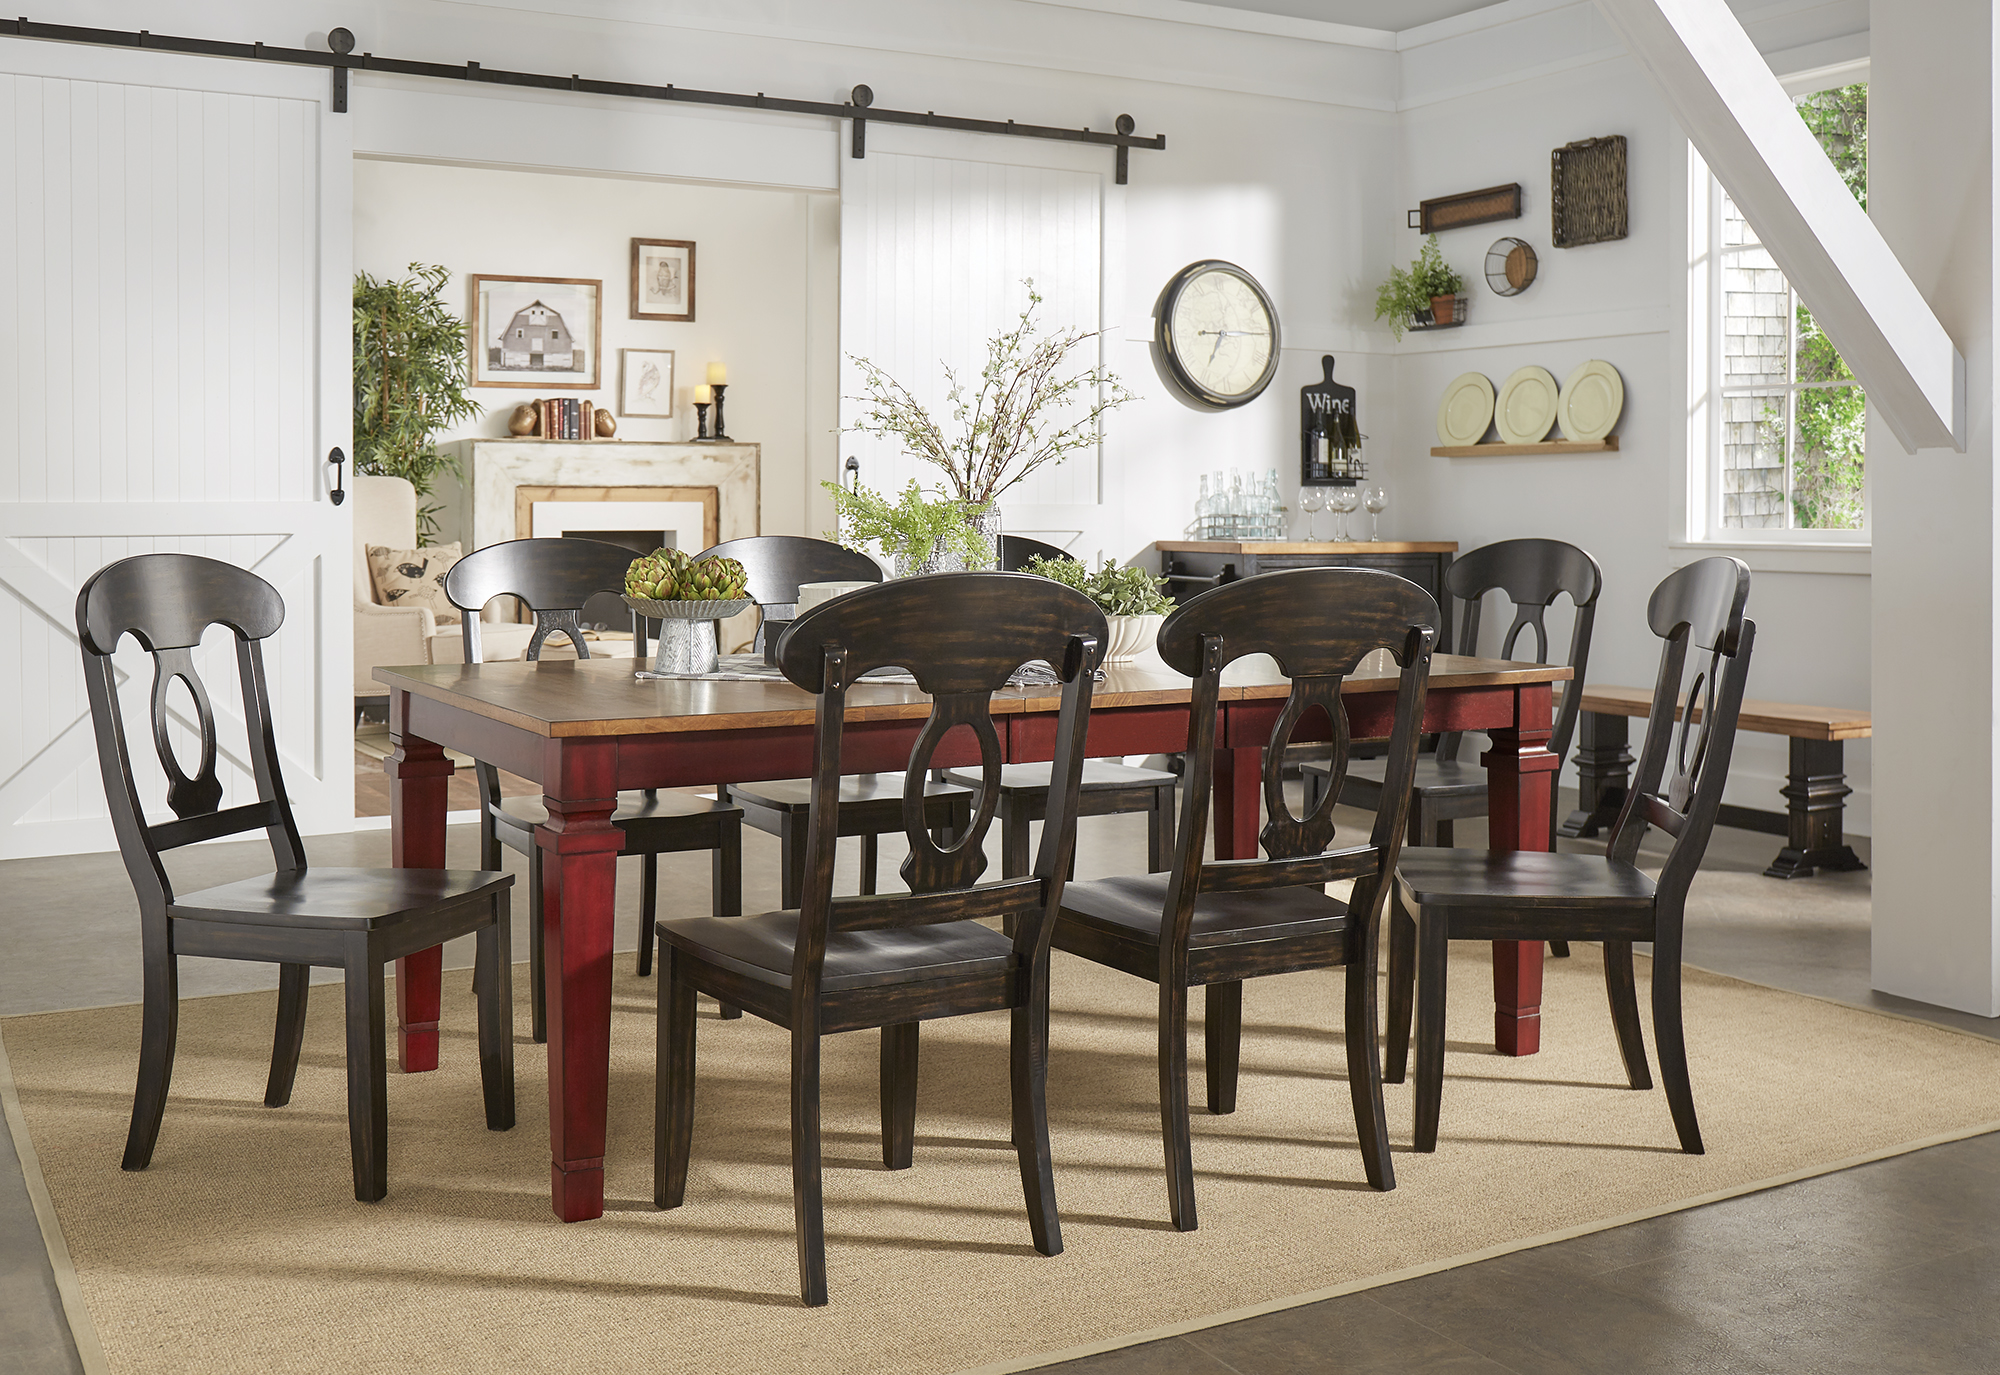 This one of the 10 inspiring dining combinations puts a modern twist on a timeless classic. The center of the room has a long, rectangular dining table with an antique berry red finish base and oak finish table top. Placed around the dining table are 8 dining chairs in a dark brown finish, standing out against the colors of the dining table and the white barndoors in the background.